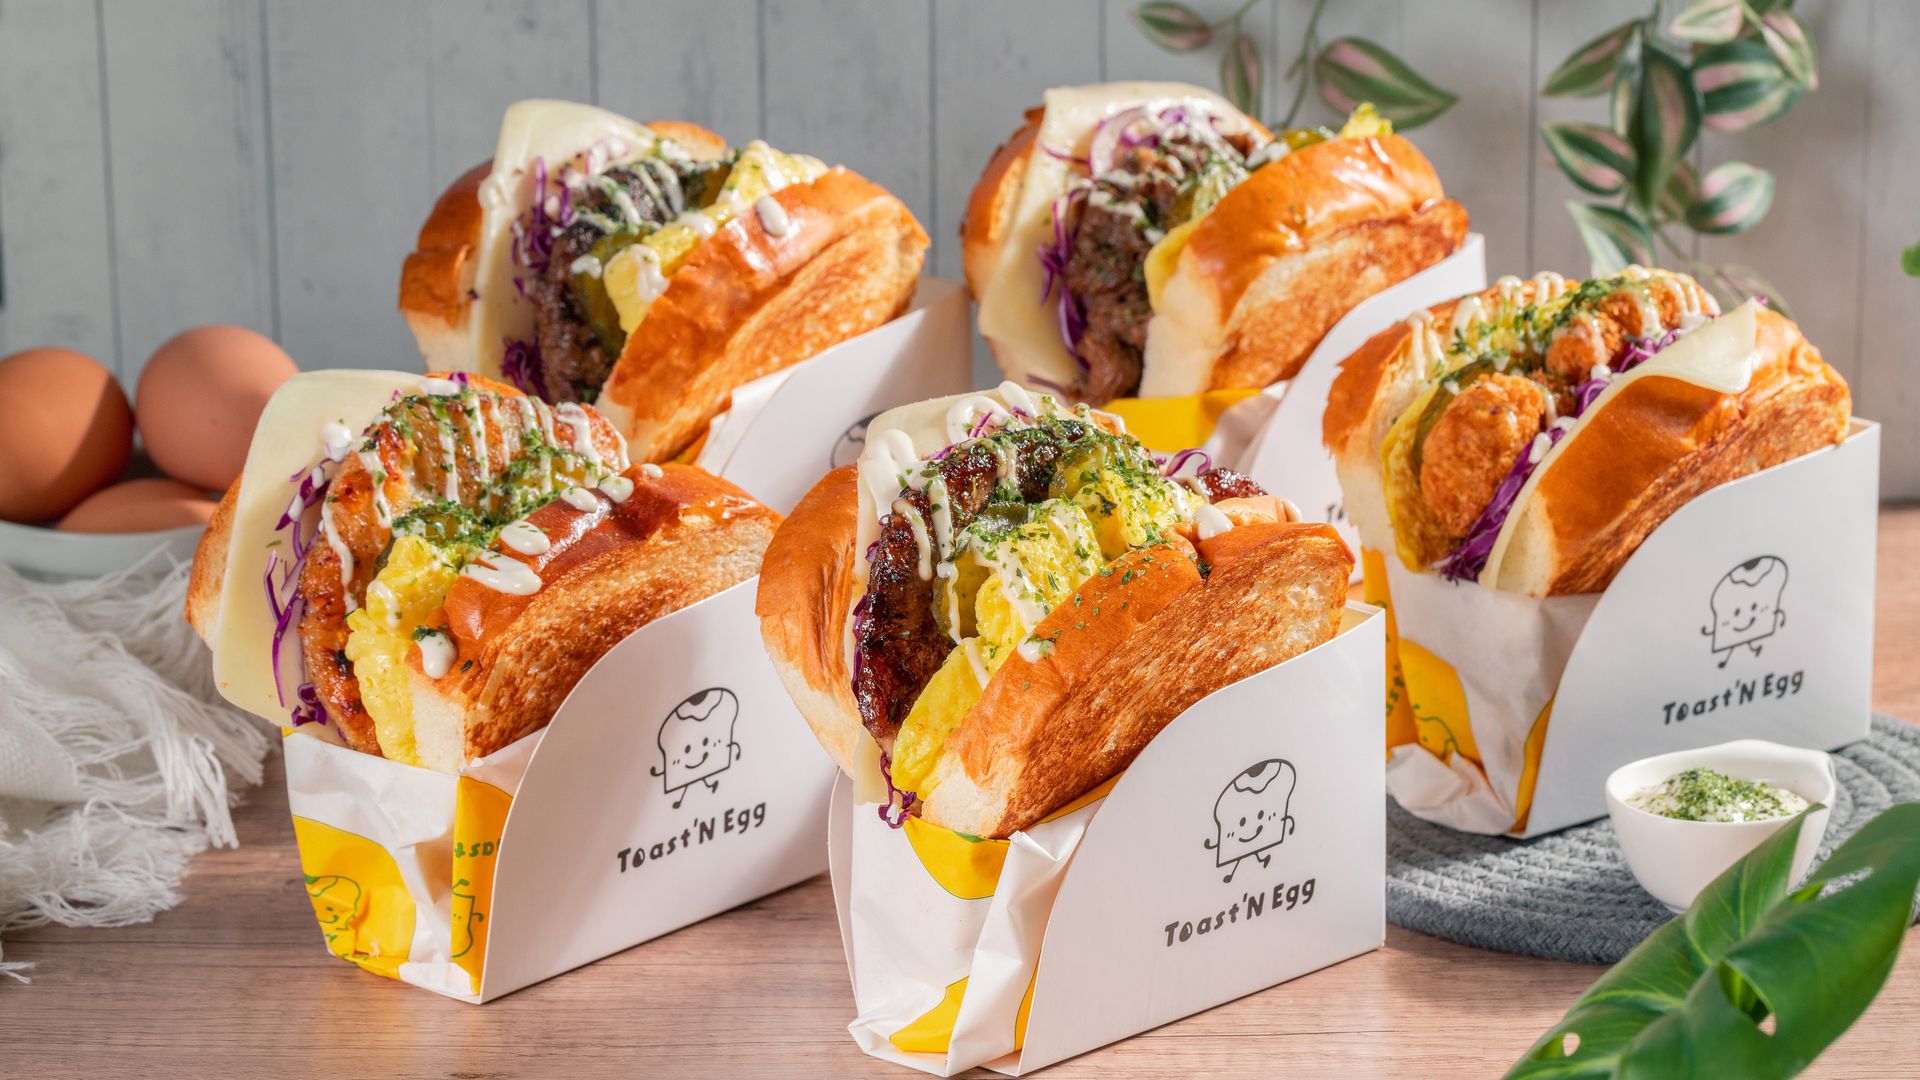 a flashy new spot for massive korean sandos and croissant waffles struts into the sunset